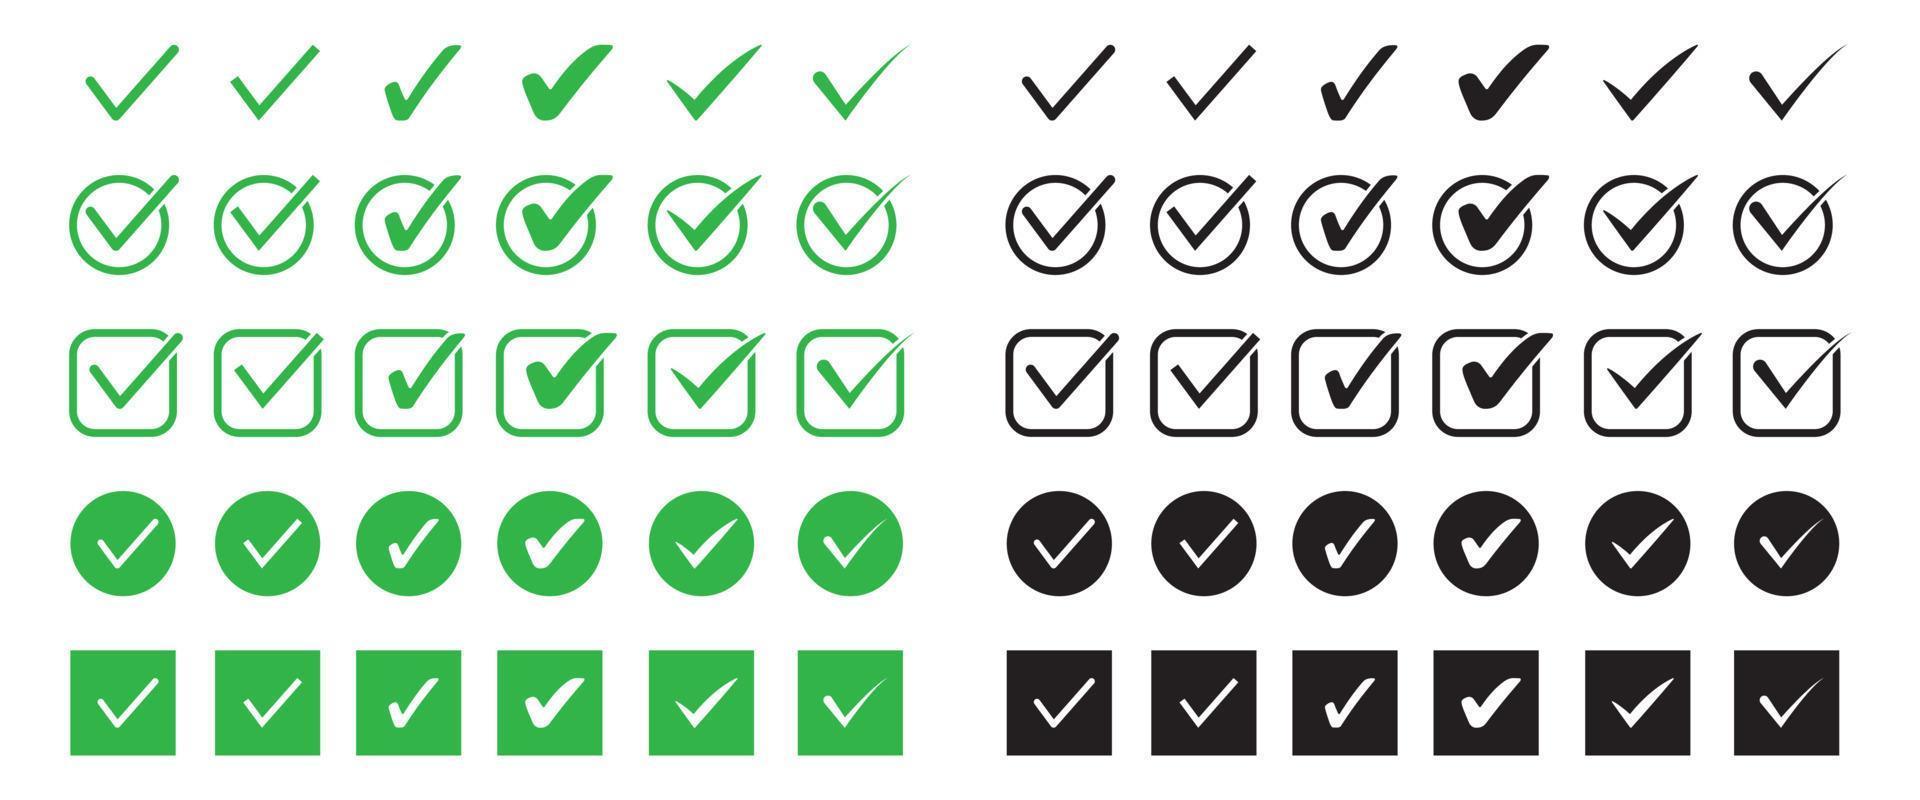 Set of green and black check mark flat icon. Silhouette of tick mark in various shapes. Vector4x4 vector